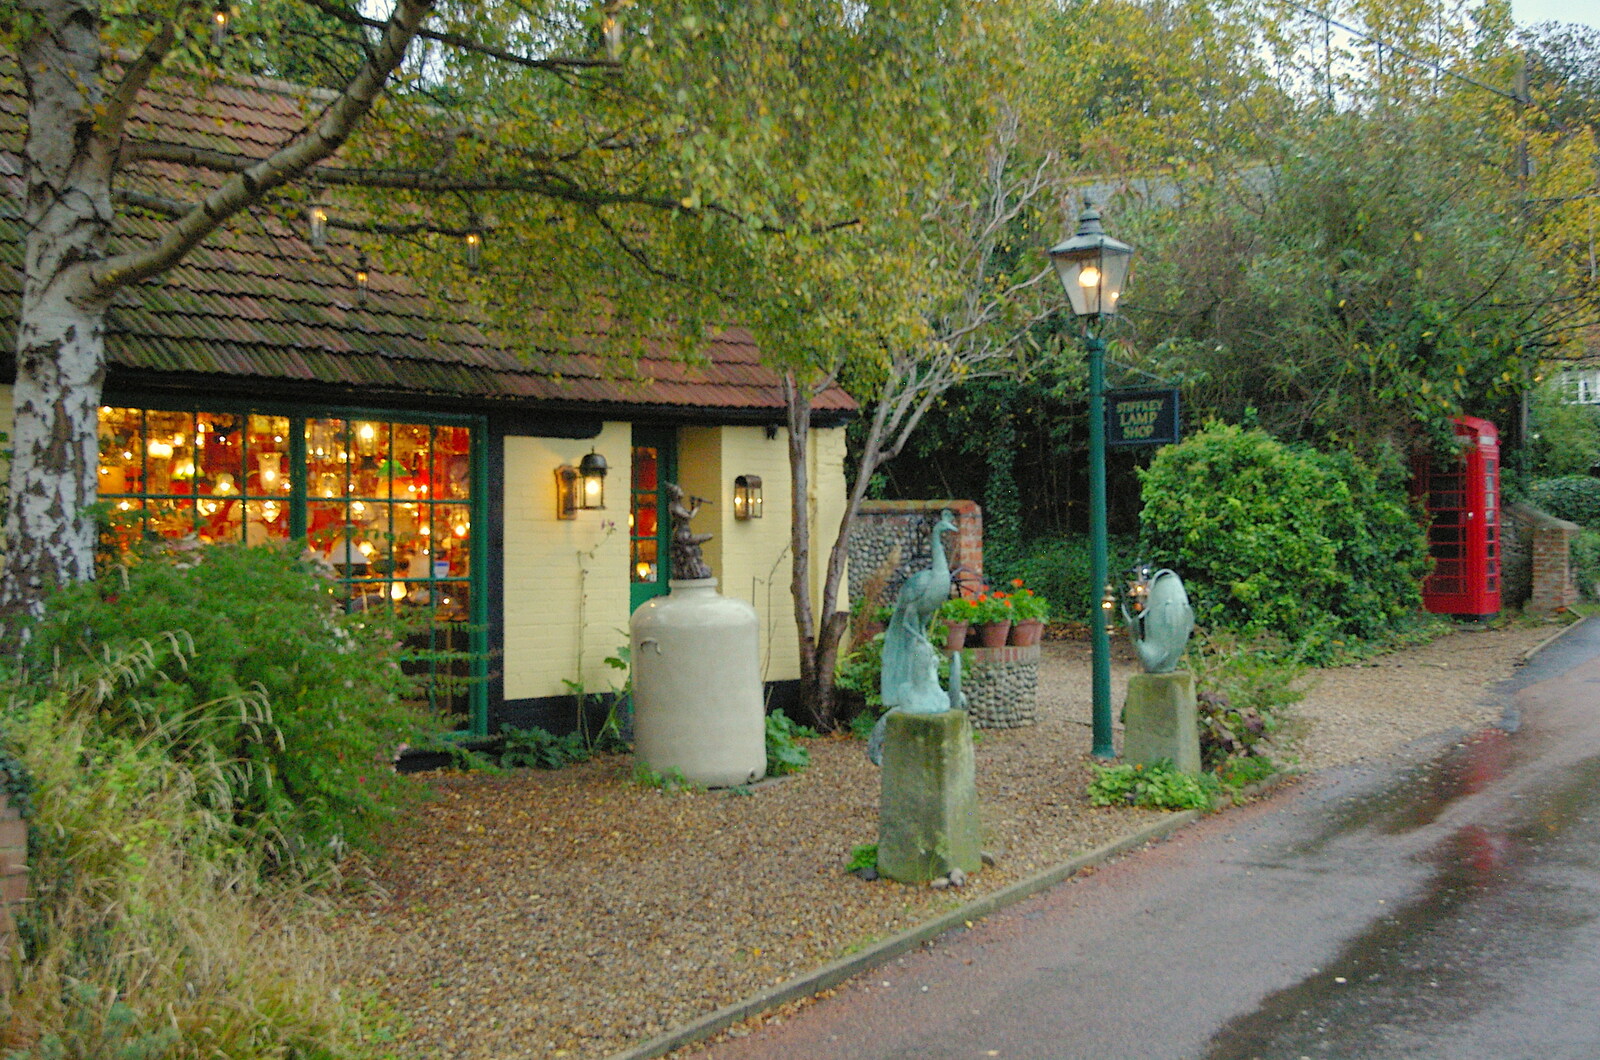 The Stiffkey Light Shop again from Mother, Mike and the Stiffkey Light Shop, Cley and Holkham - 6th November 2005